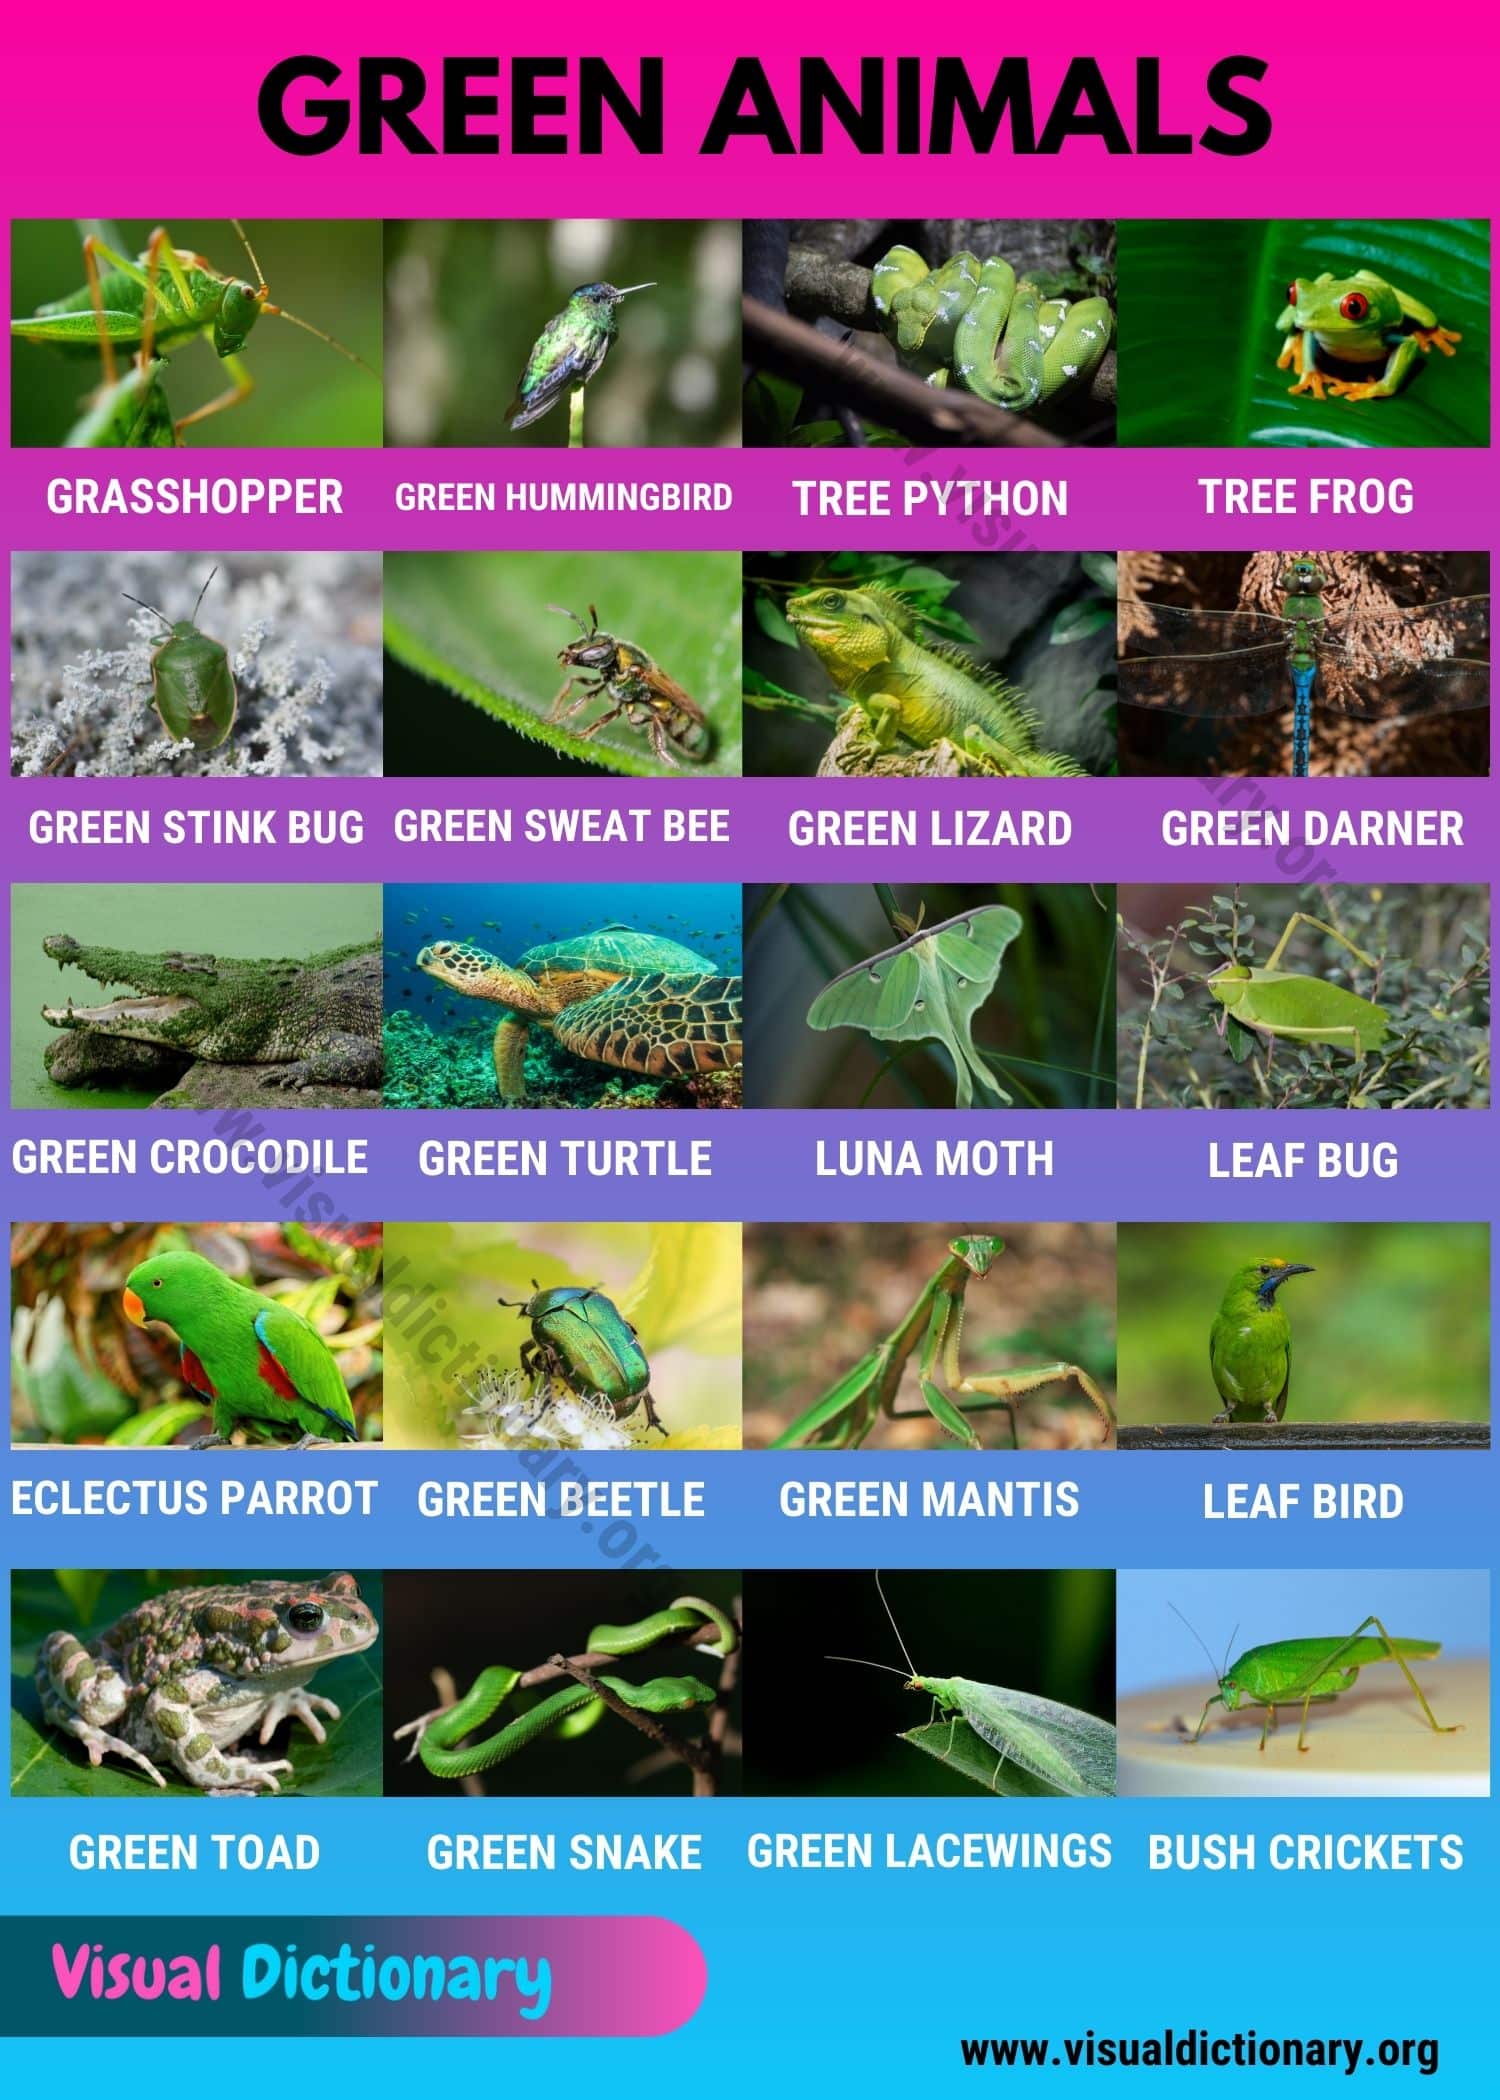 Green Animals: 20 Amazing Green Animals in the World - Visual Dictionary